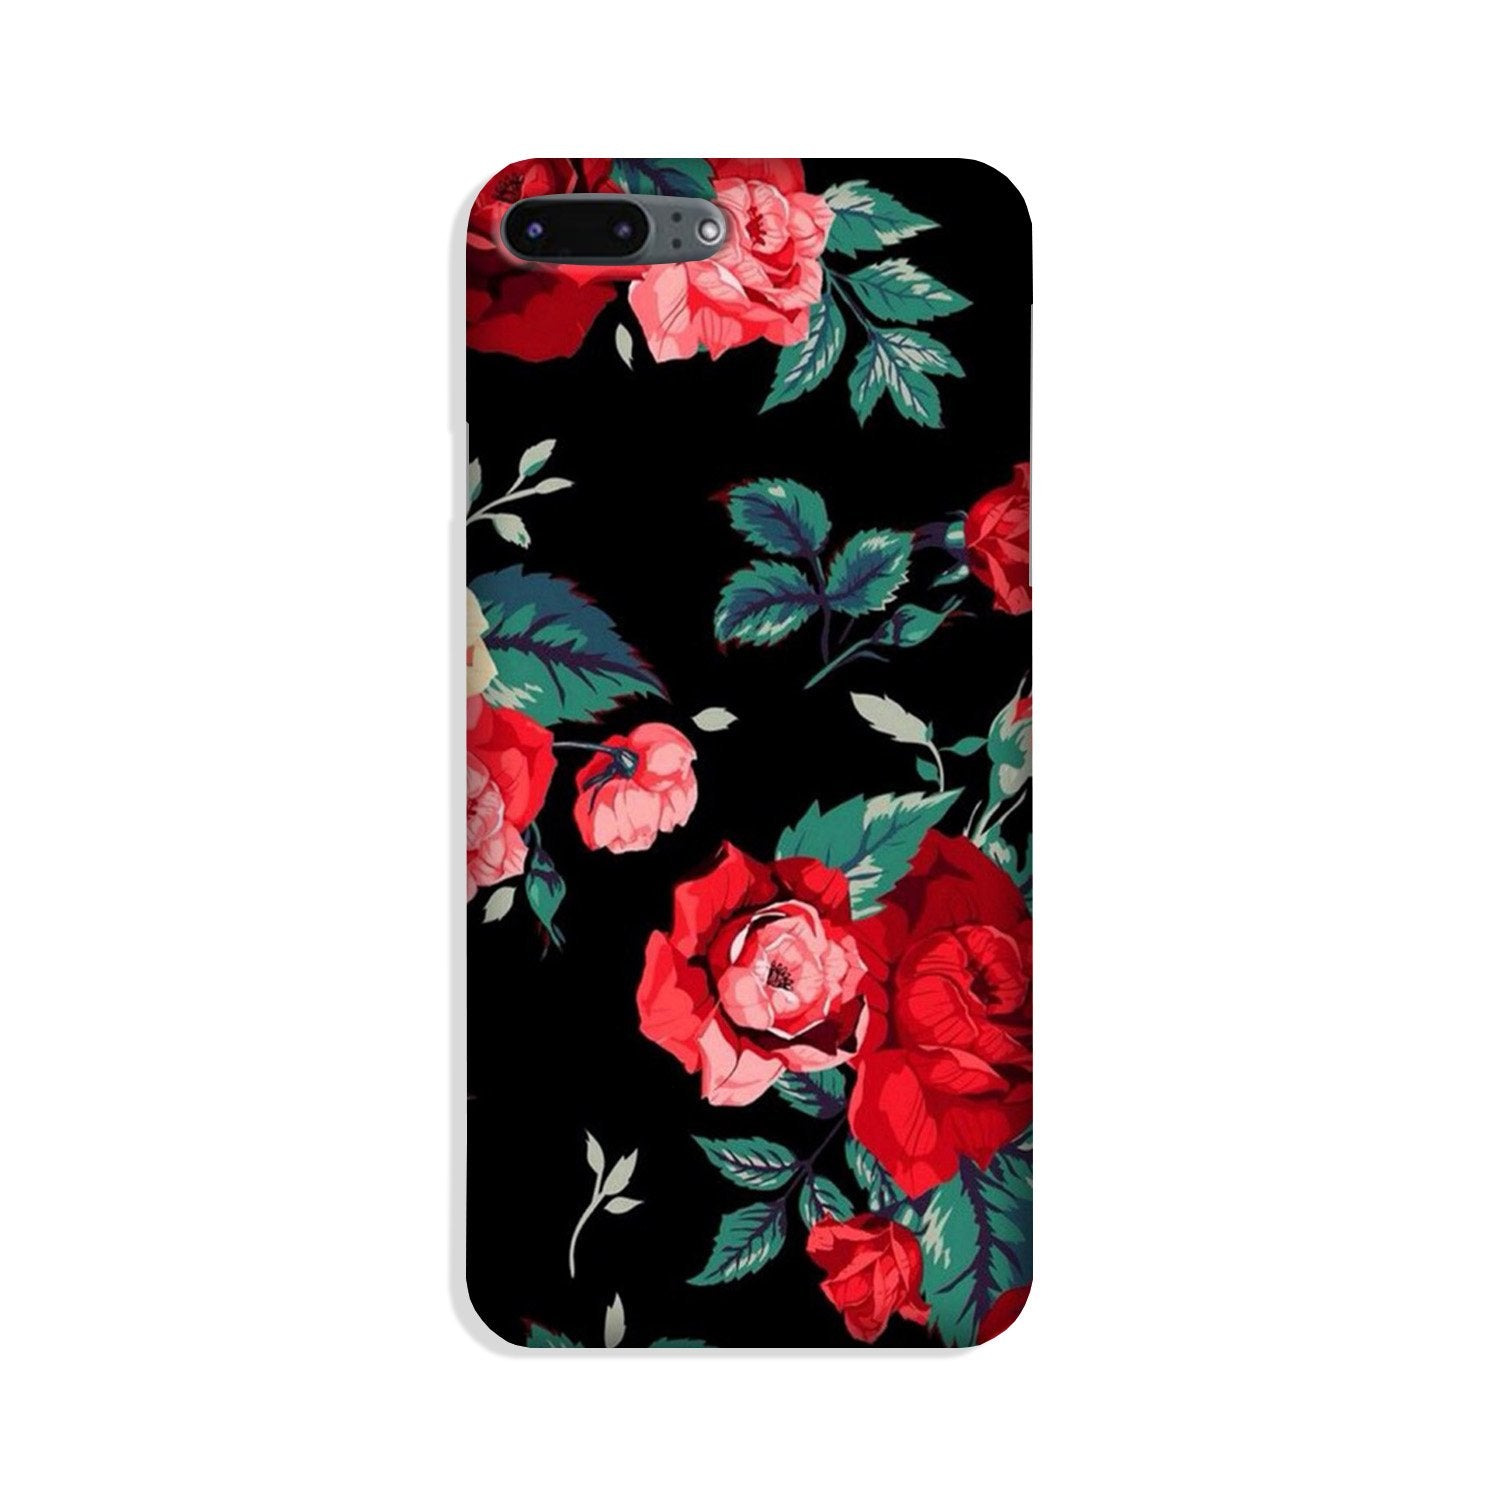 Red Rose2 Case for iPhone 8 Plus